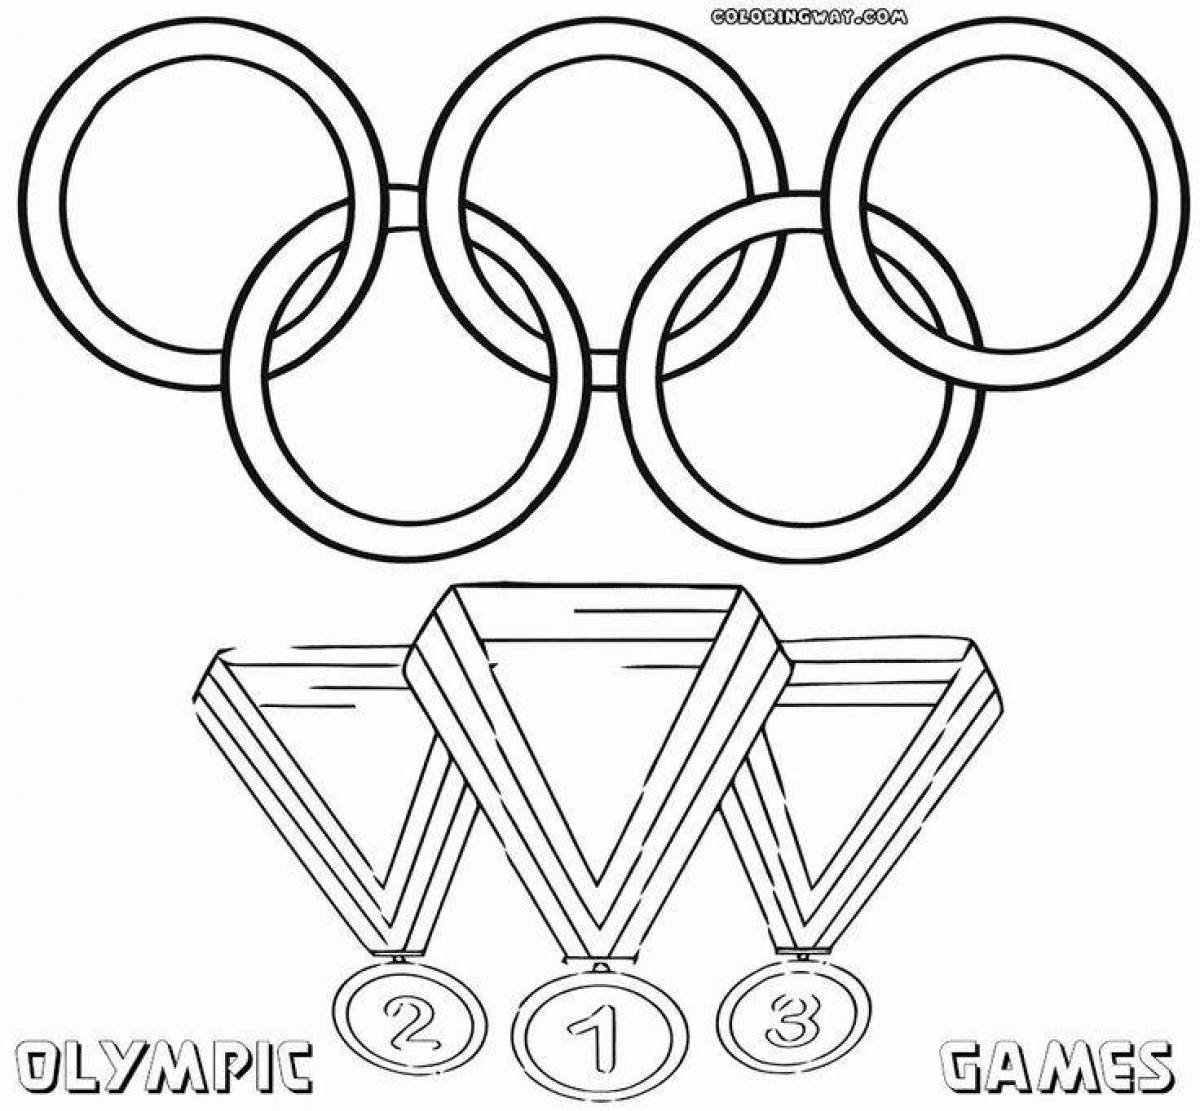 Coloring page inviting olympic rings